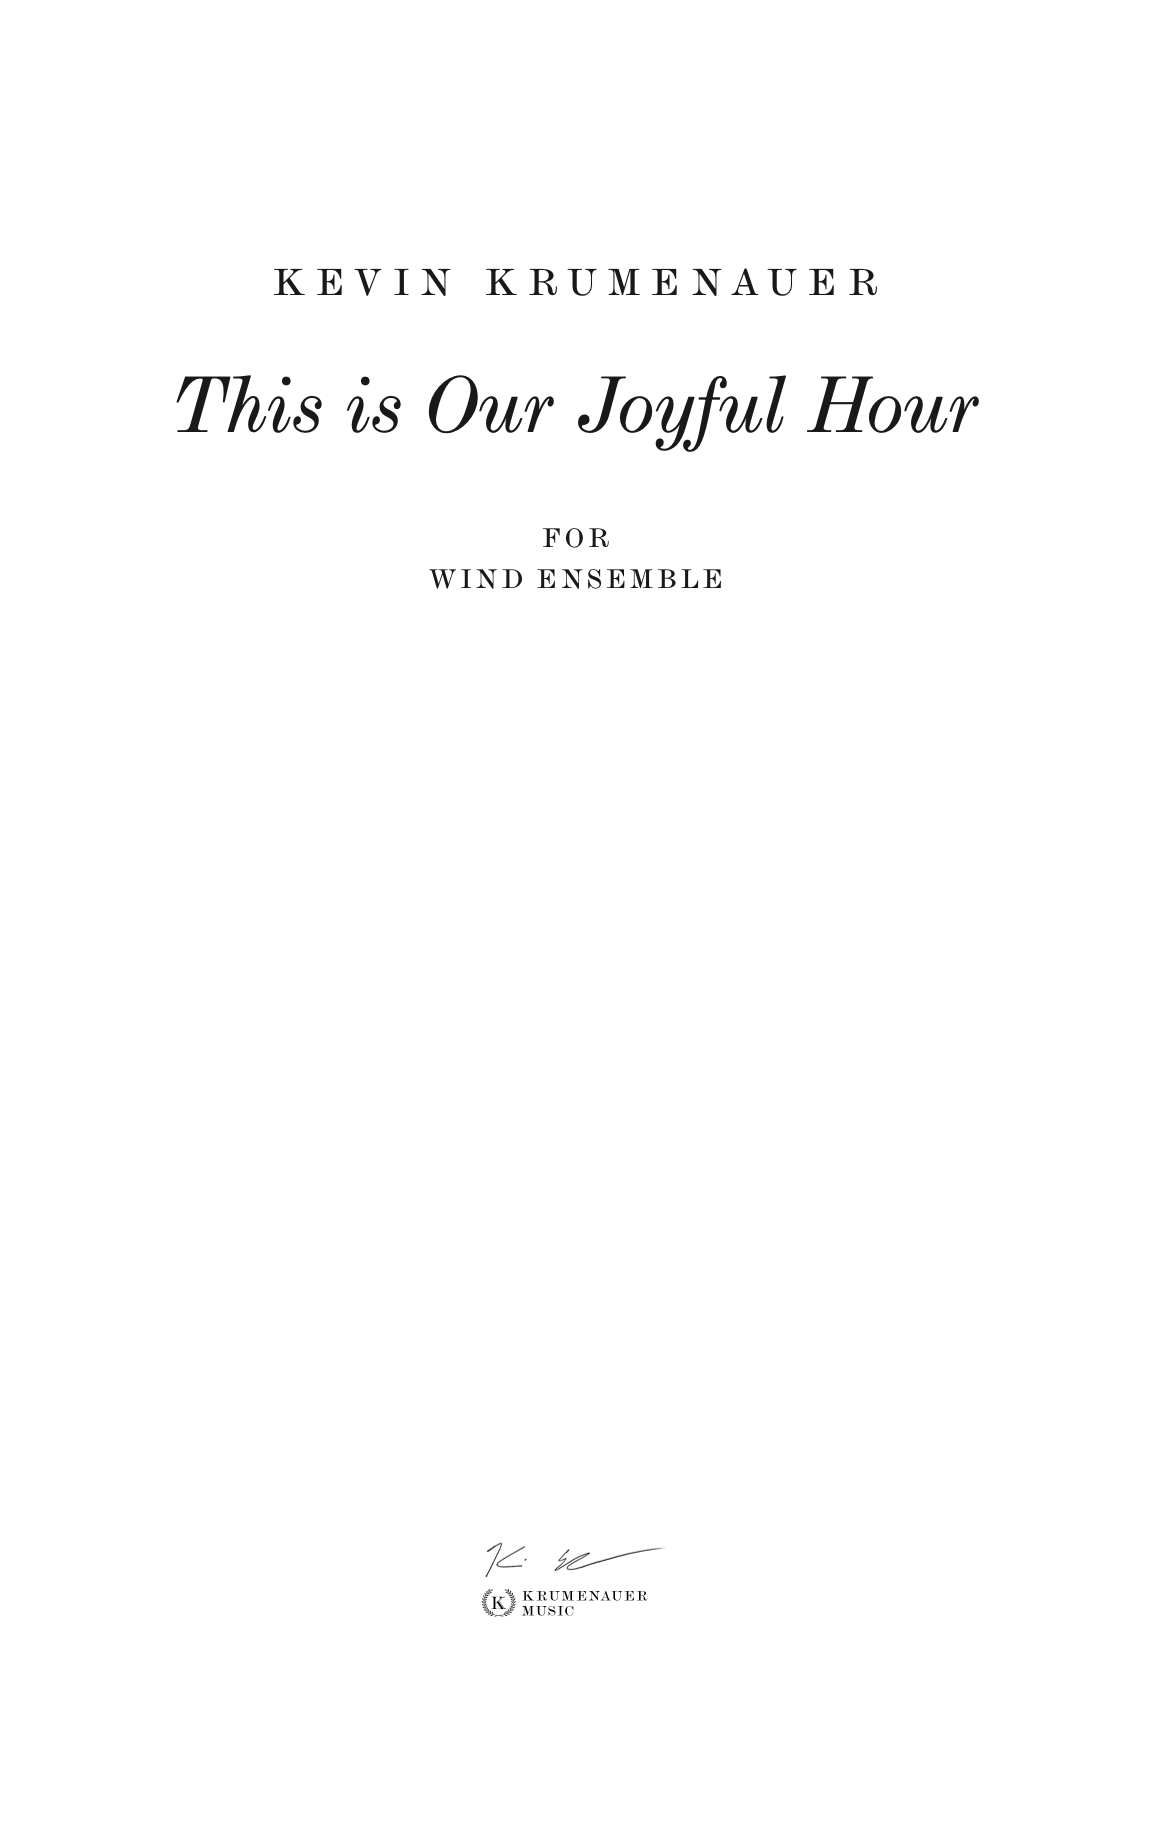 This Is Our Joyful Hour (Score Only) by Kevin Krumenauer